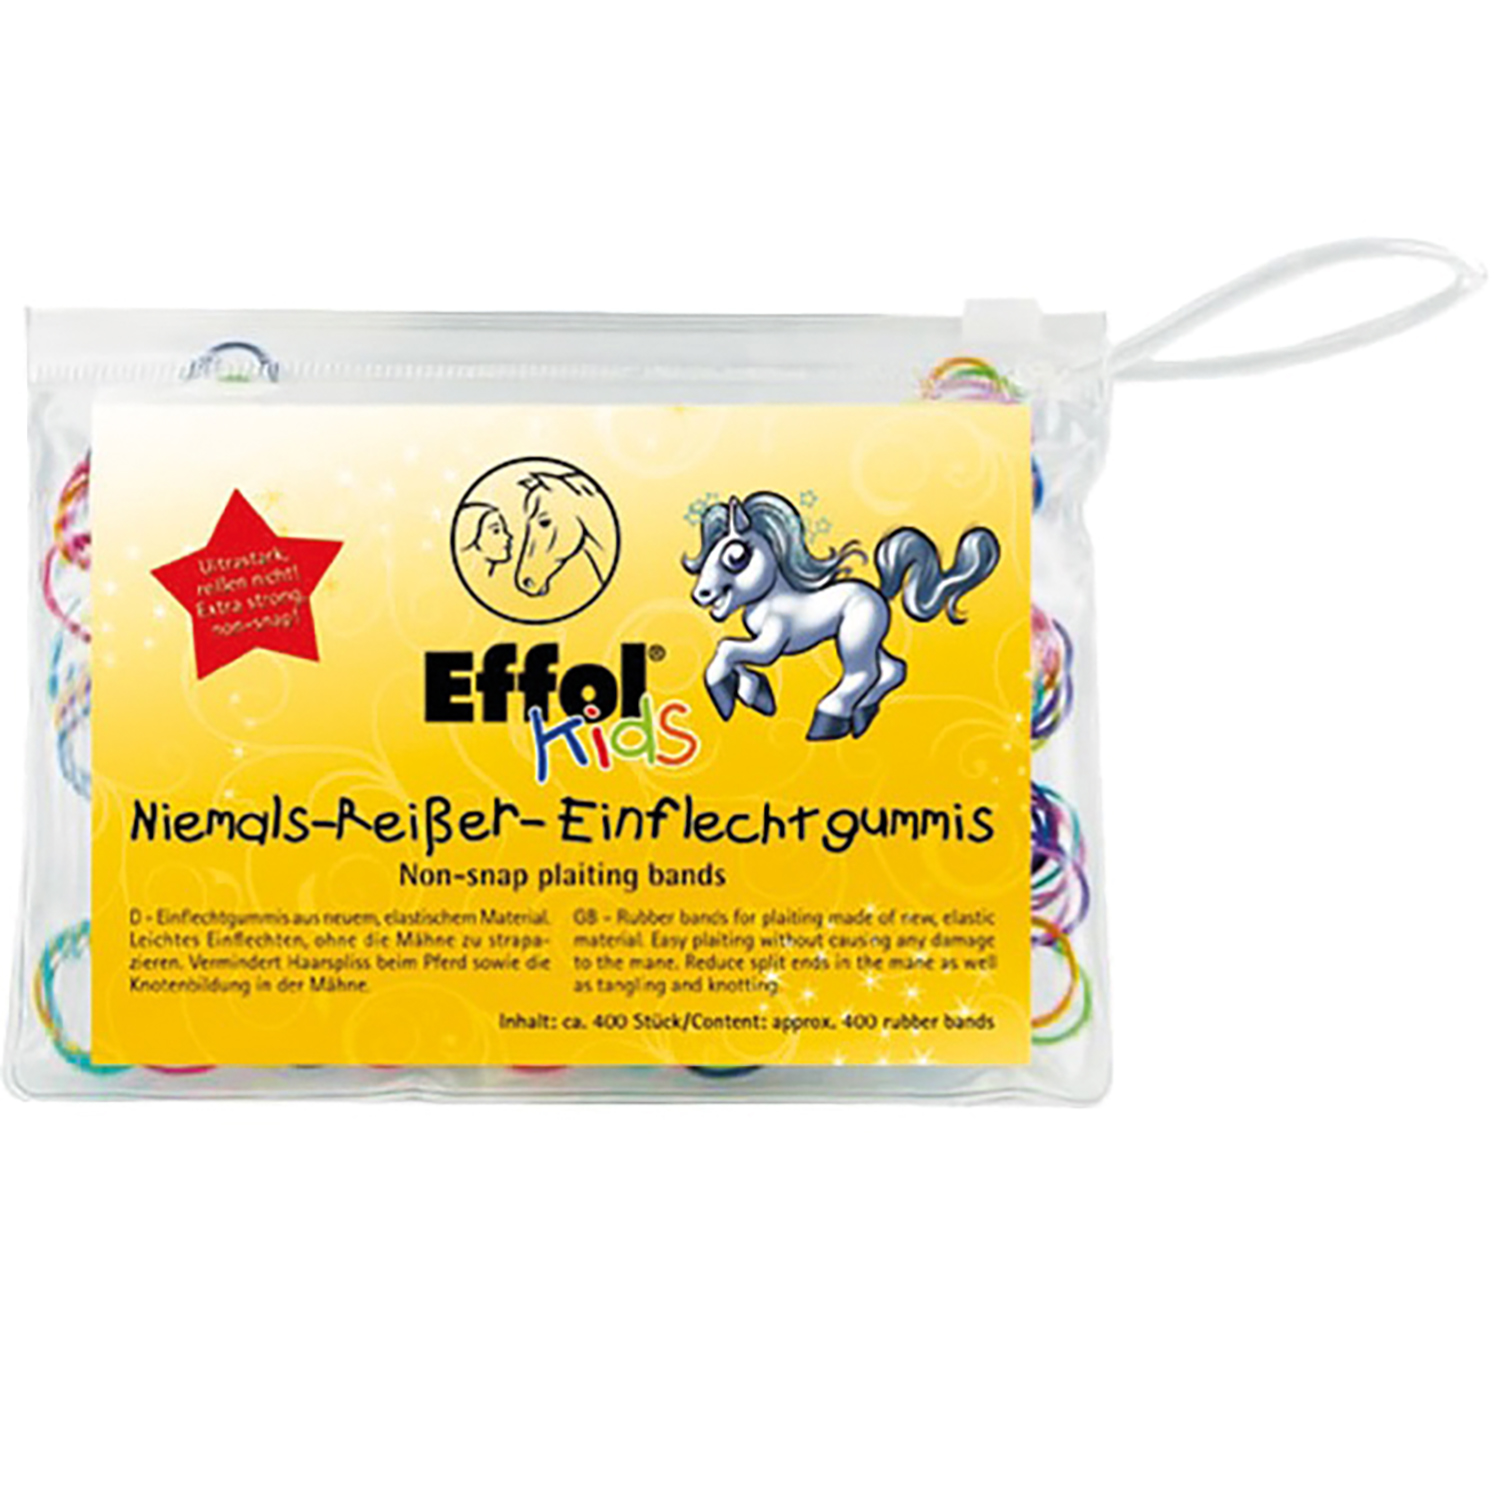 EFFOL KIDS NON-SNAP PLAITING BANDS 400 PACK 400 PACK